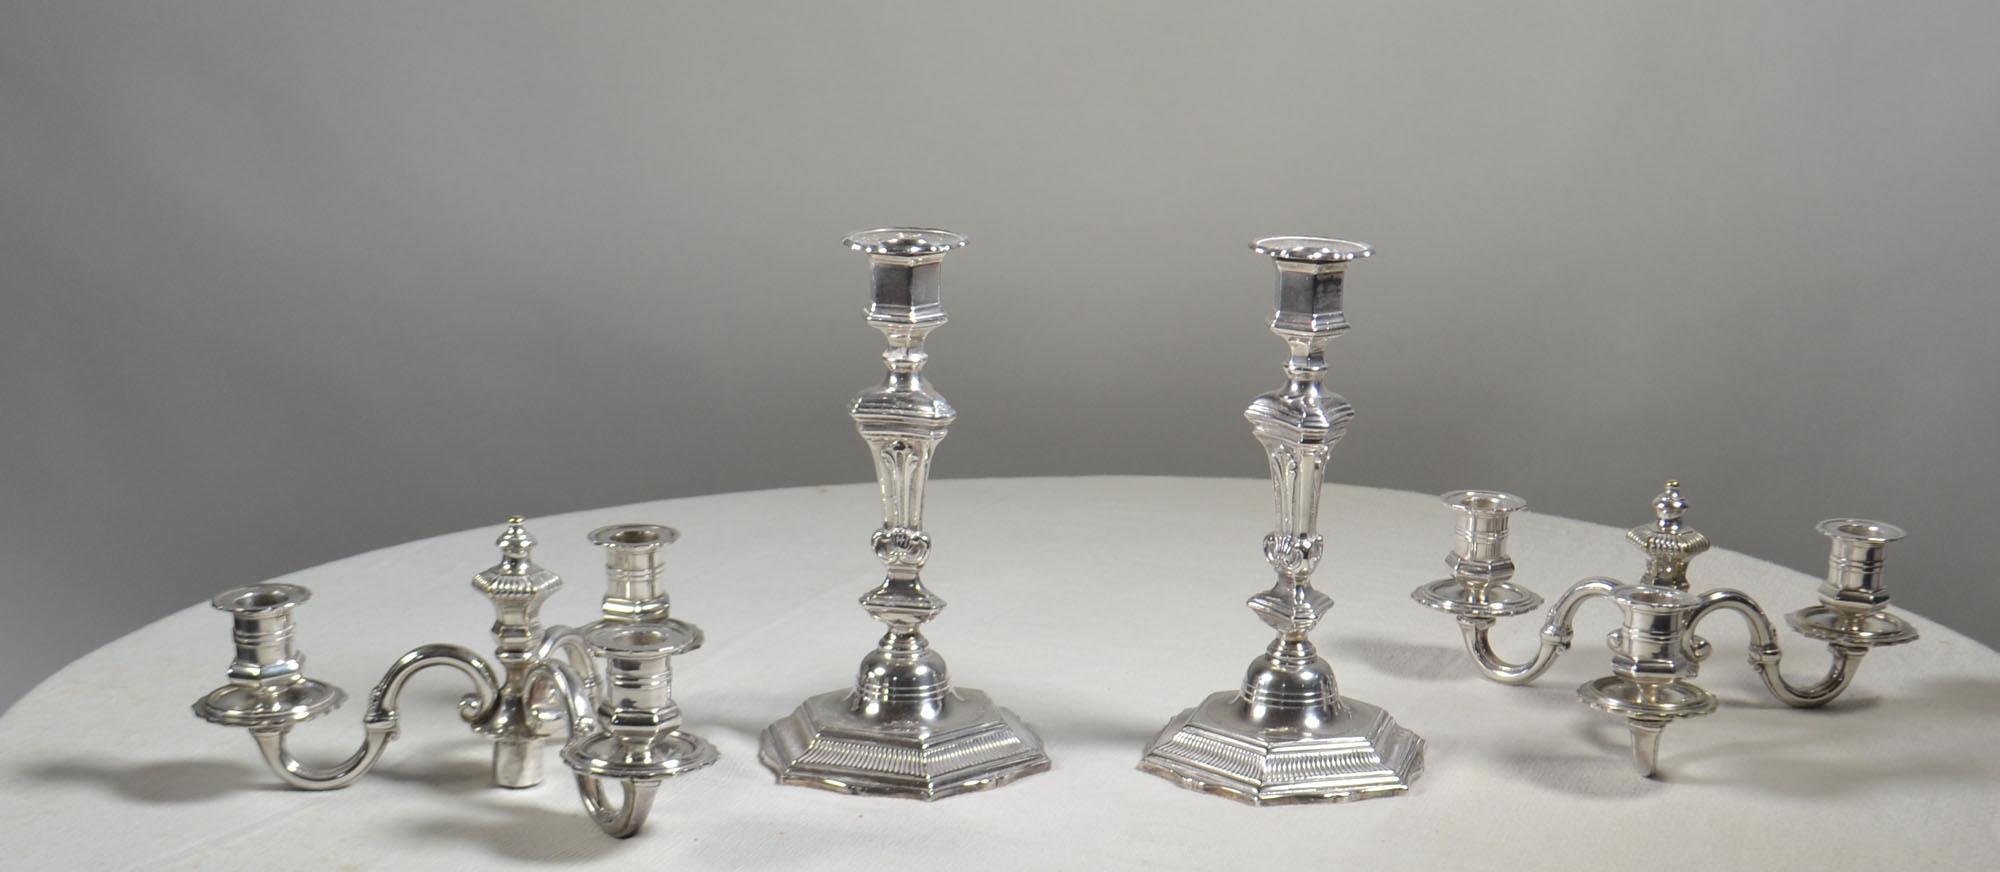 Pair of Silver Plated Bronze Candelabras, converts to Single Candlesticks In Good Condition For Sale In Vista, CA